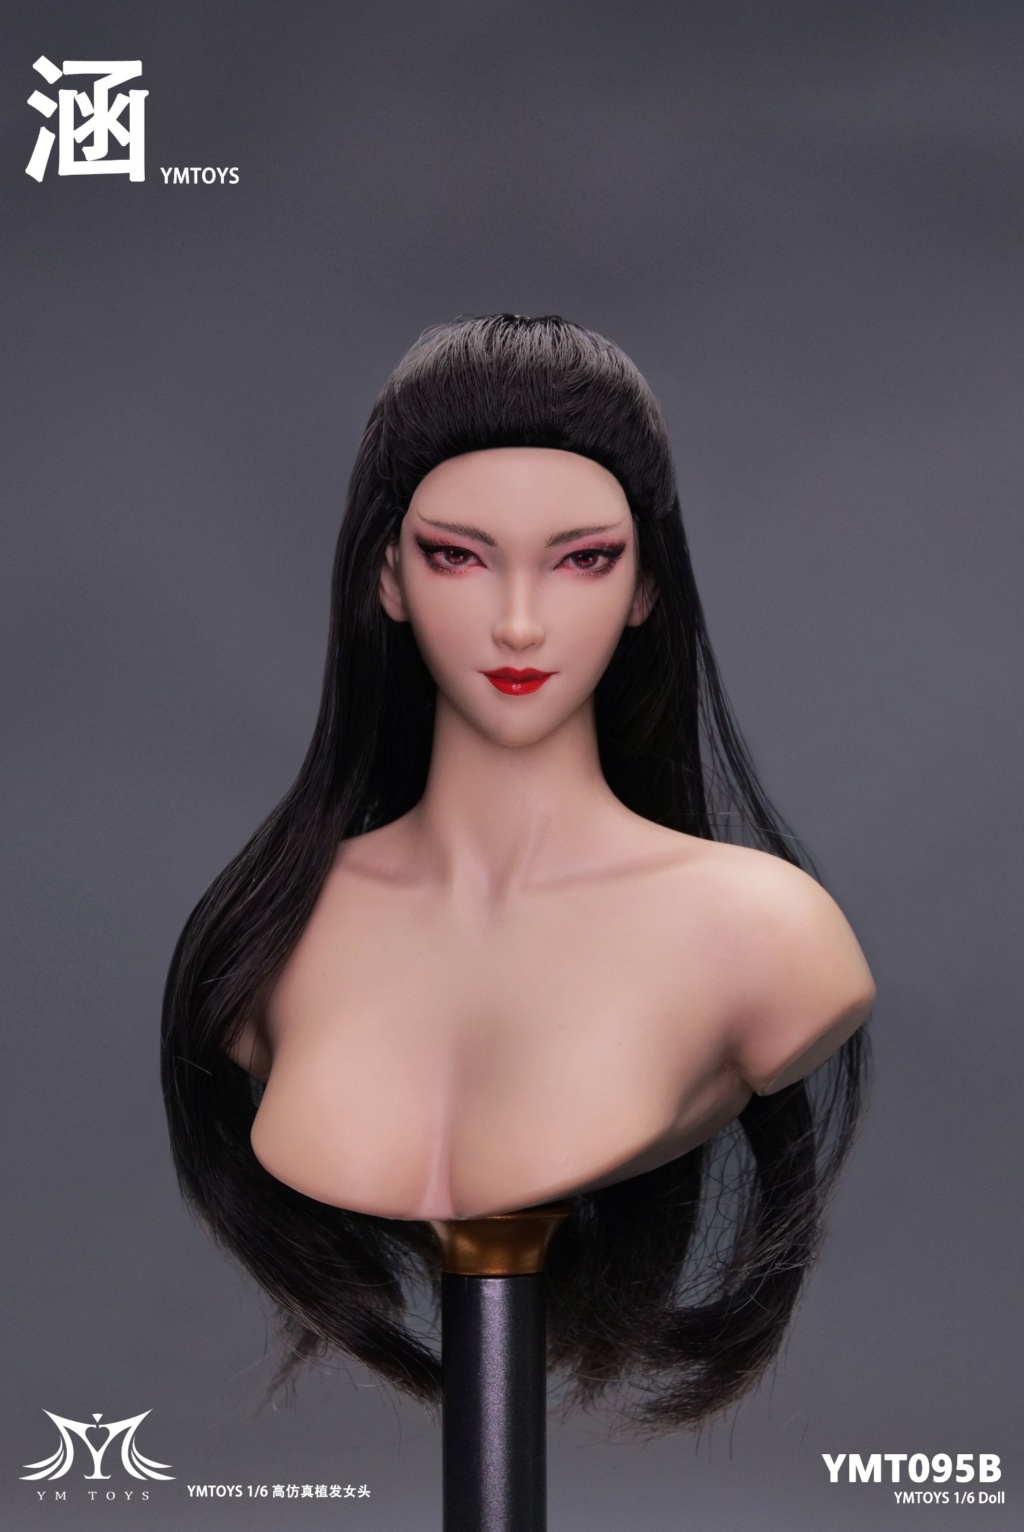 accessory - NEW PRODUCT: YMToys: 1/6 hair transplant female head carving Han (YMT095) ​​King (YMT096) 14293610